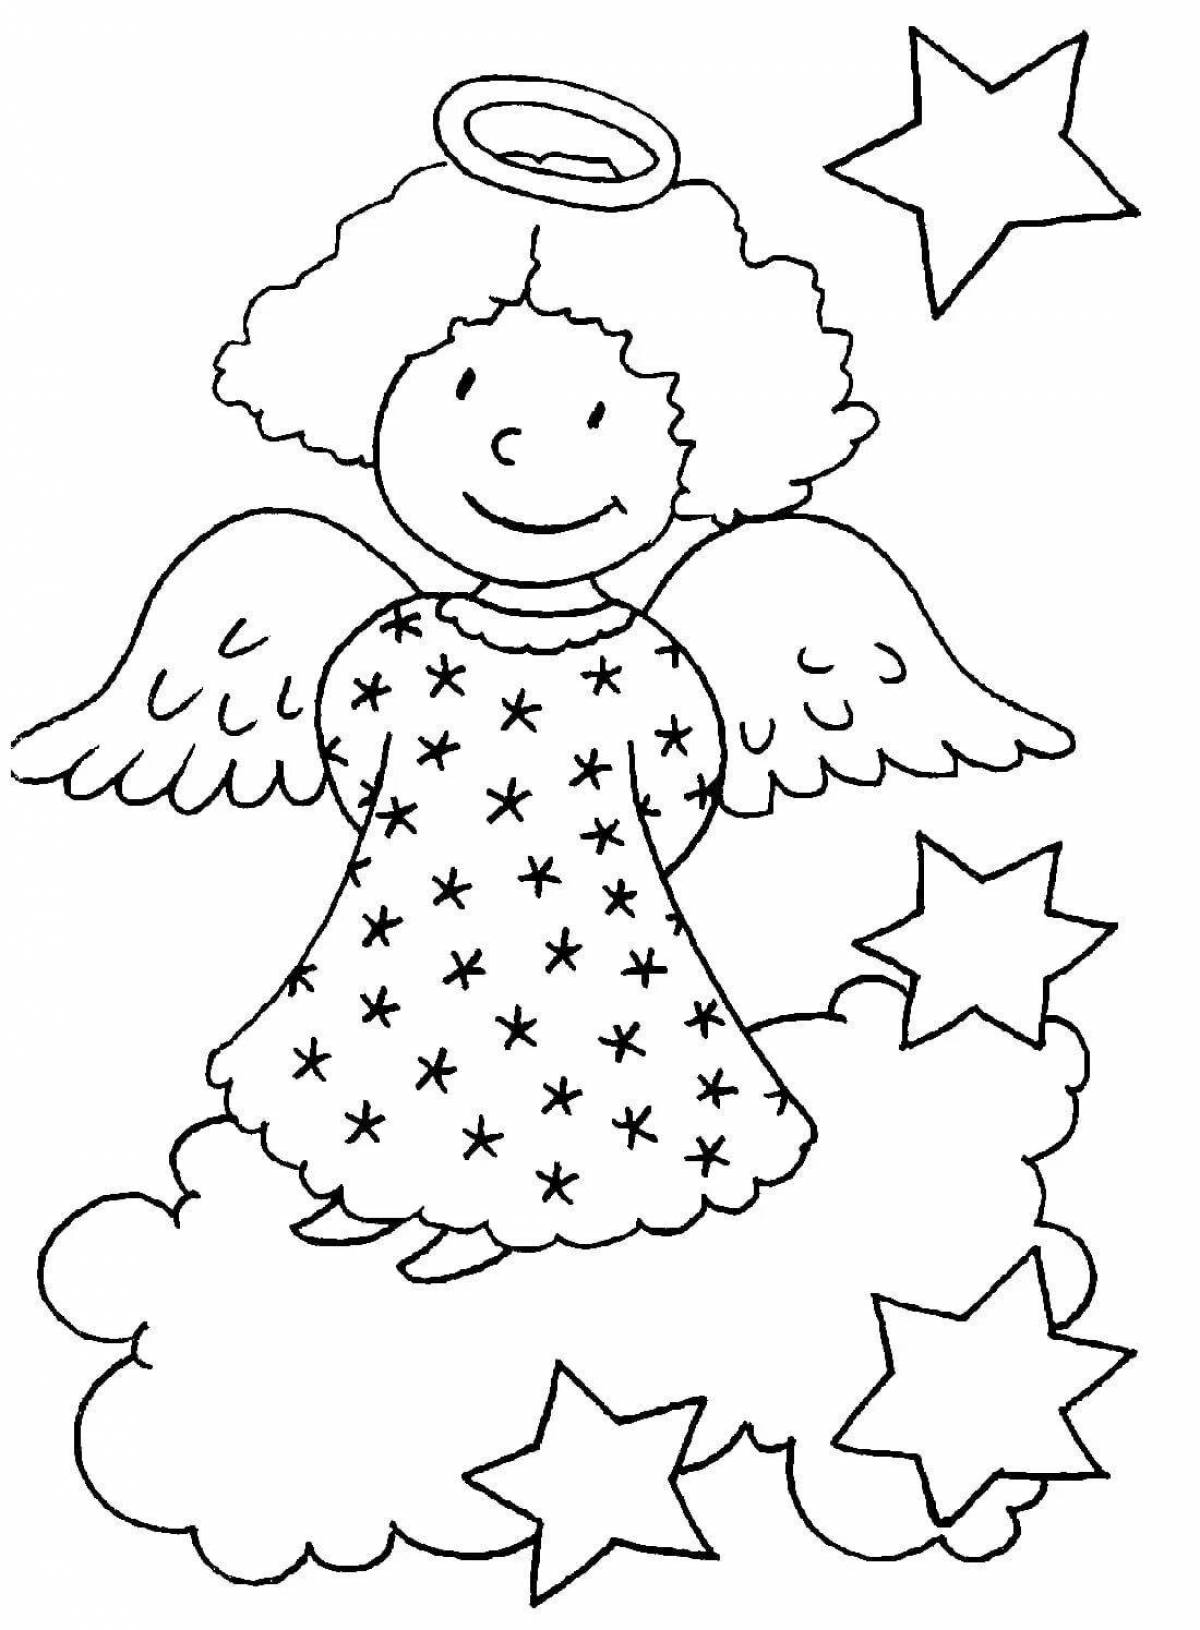 Exalted angel coloring book for kids